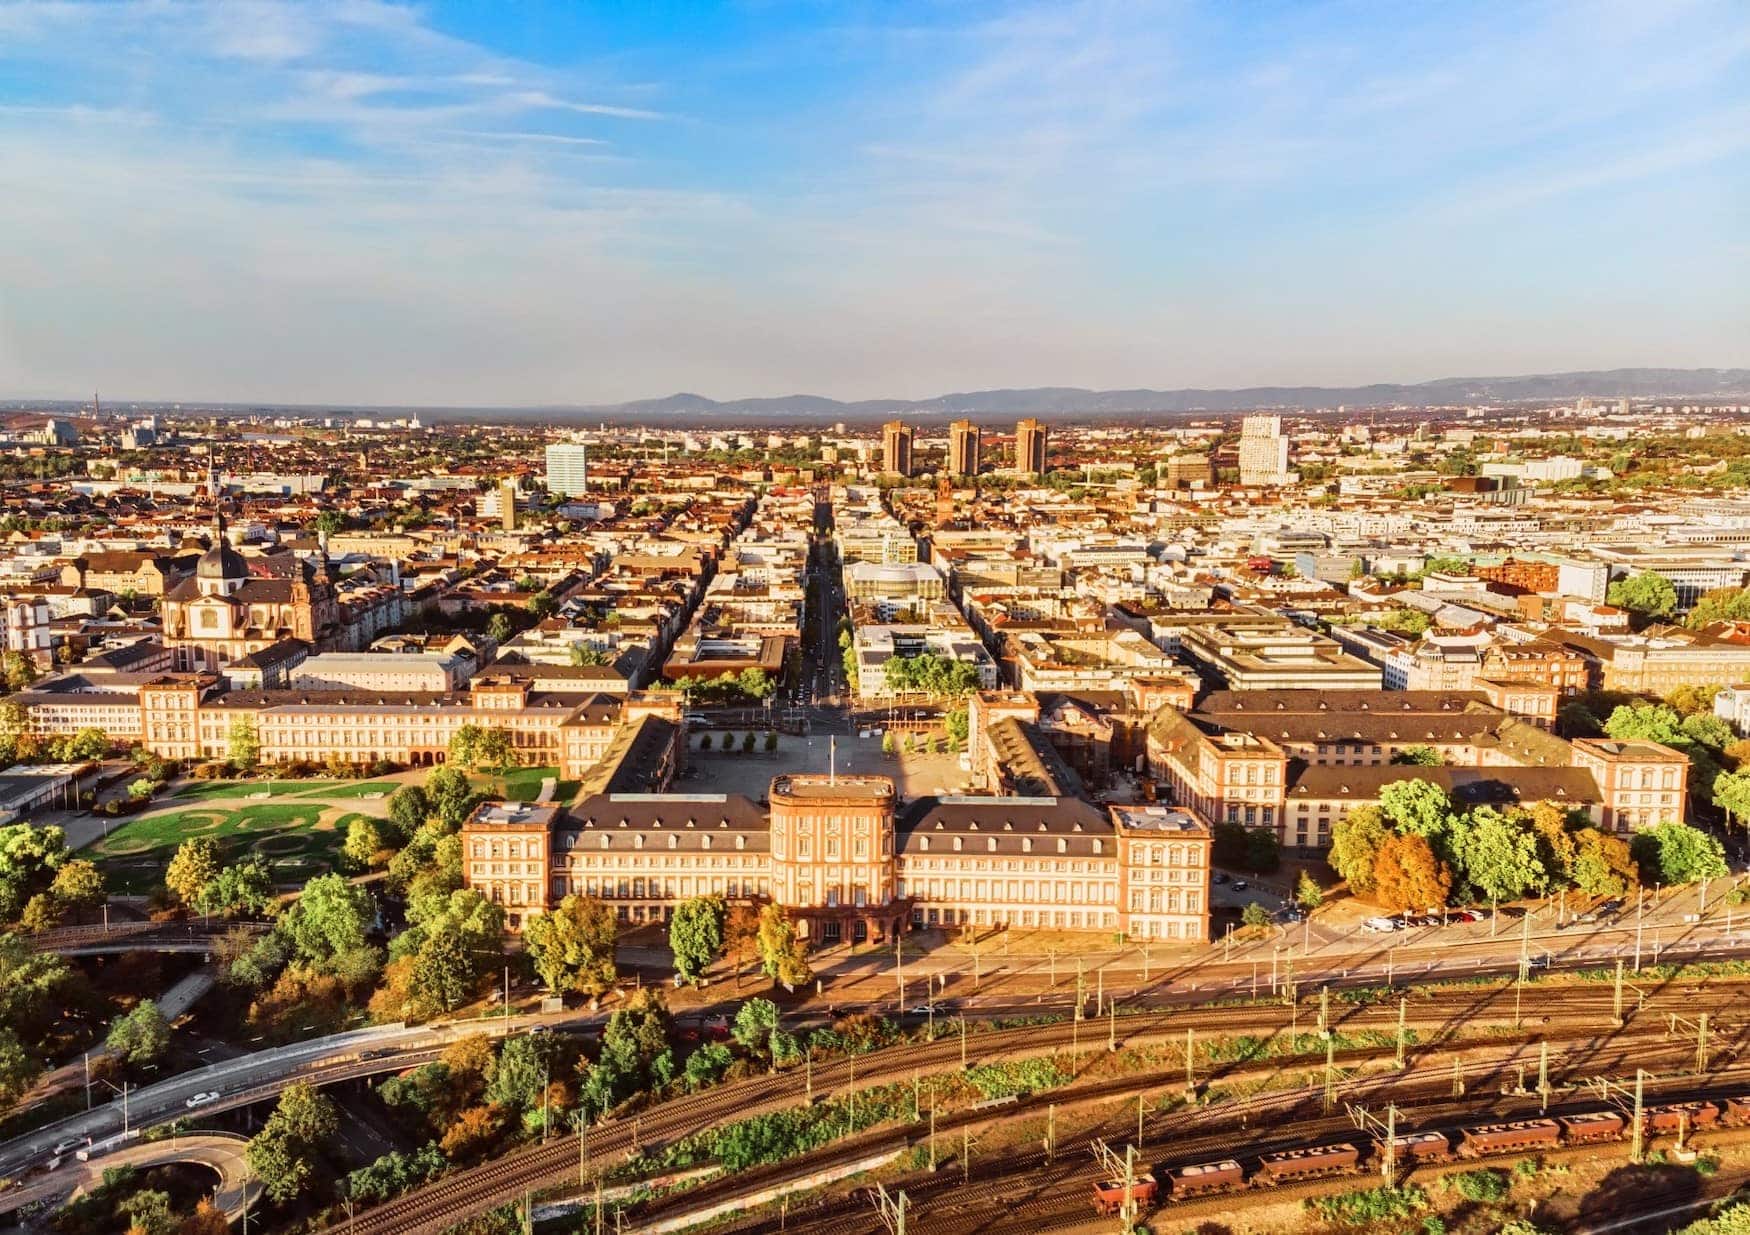 Mannheim, one of the most beautiful cities in Baden-Württemberg, from a bird's eye view